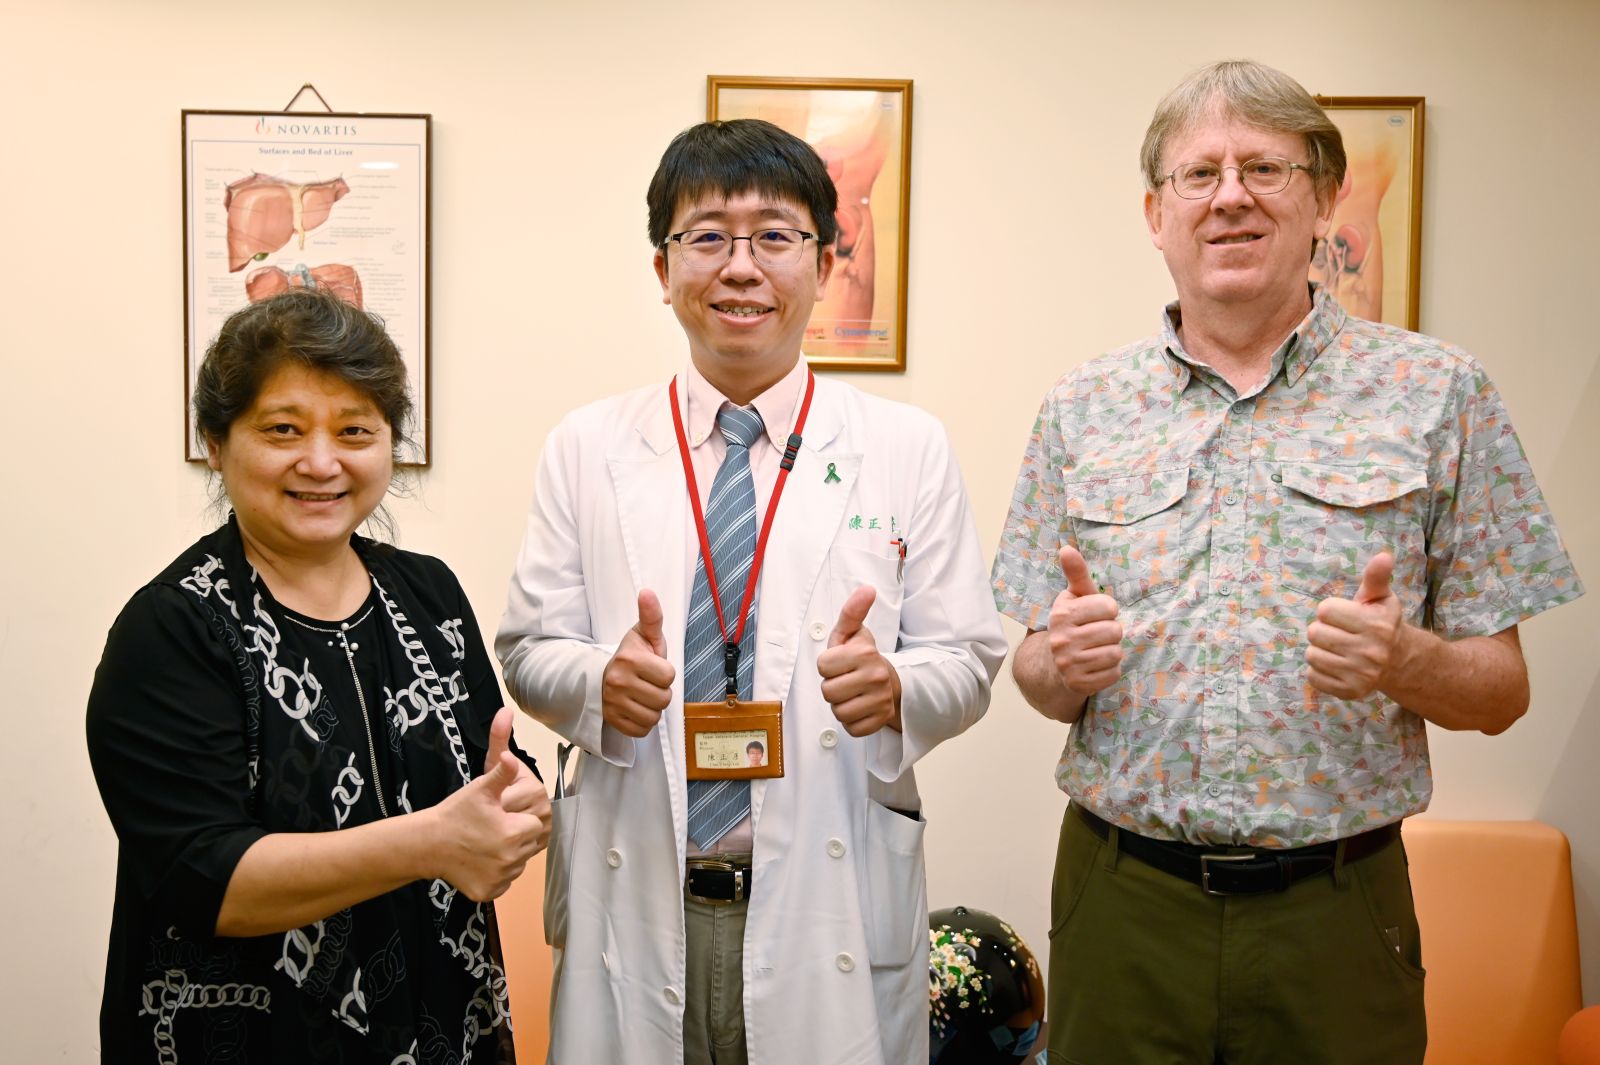 The couple and Dr.CHEN CHENG-YEN took a photo together